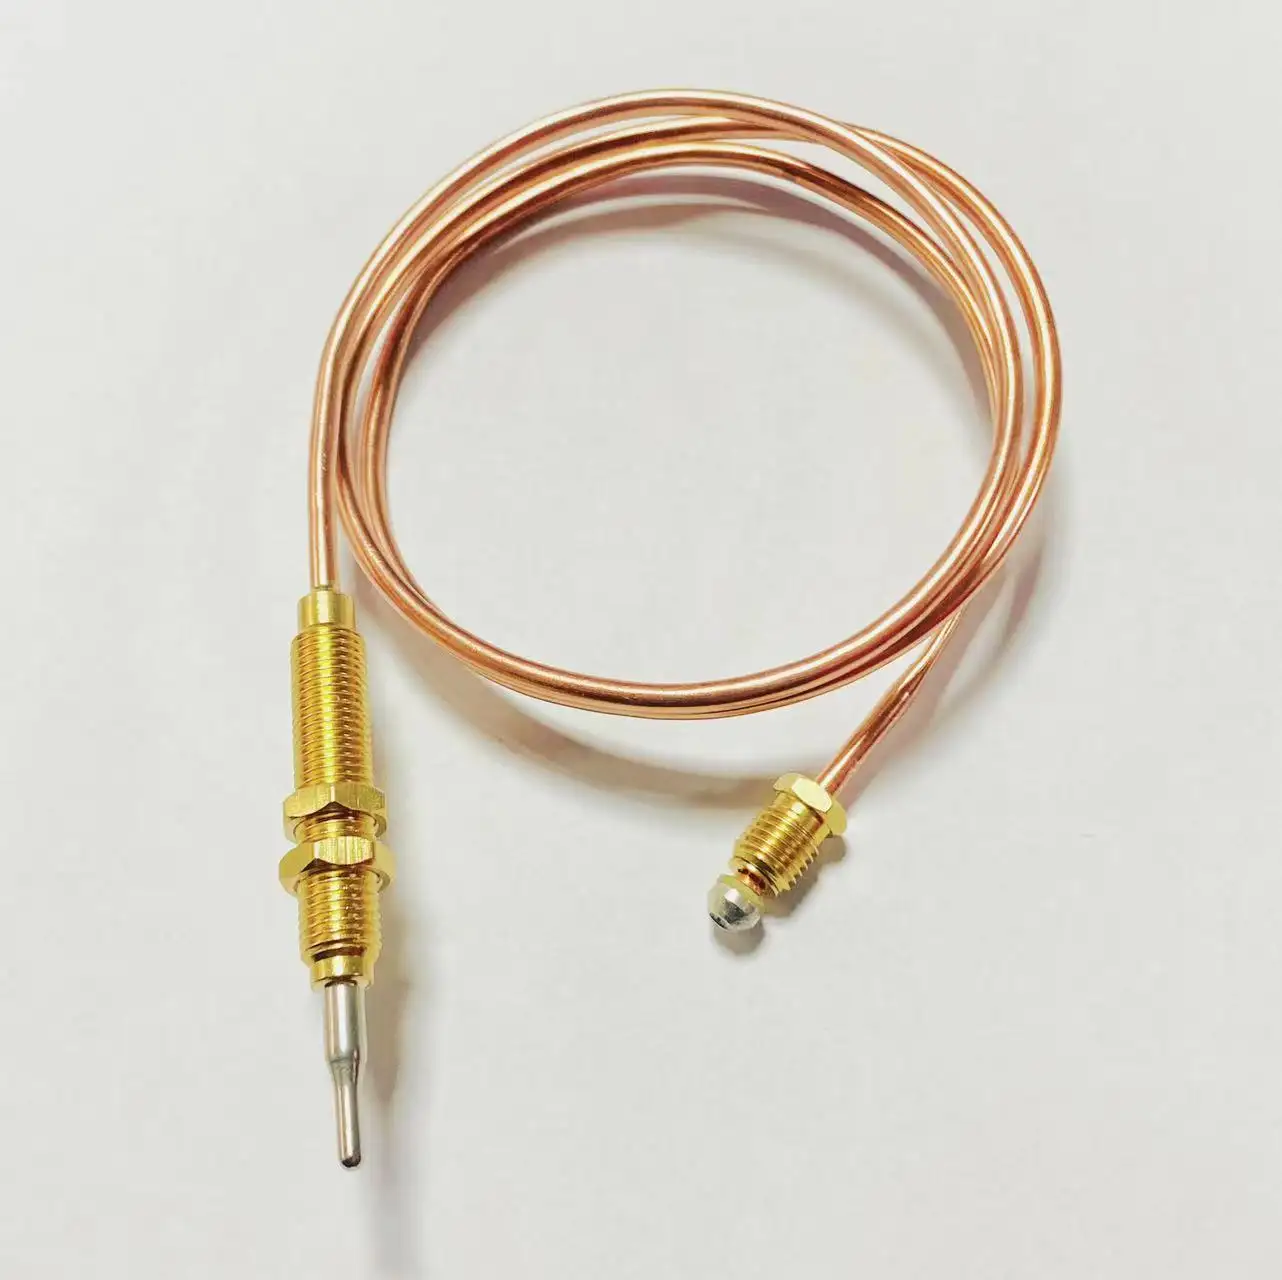 High quality professional electric oven oven water heater safety device thermocouple